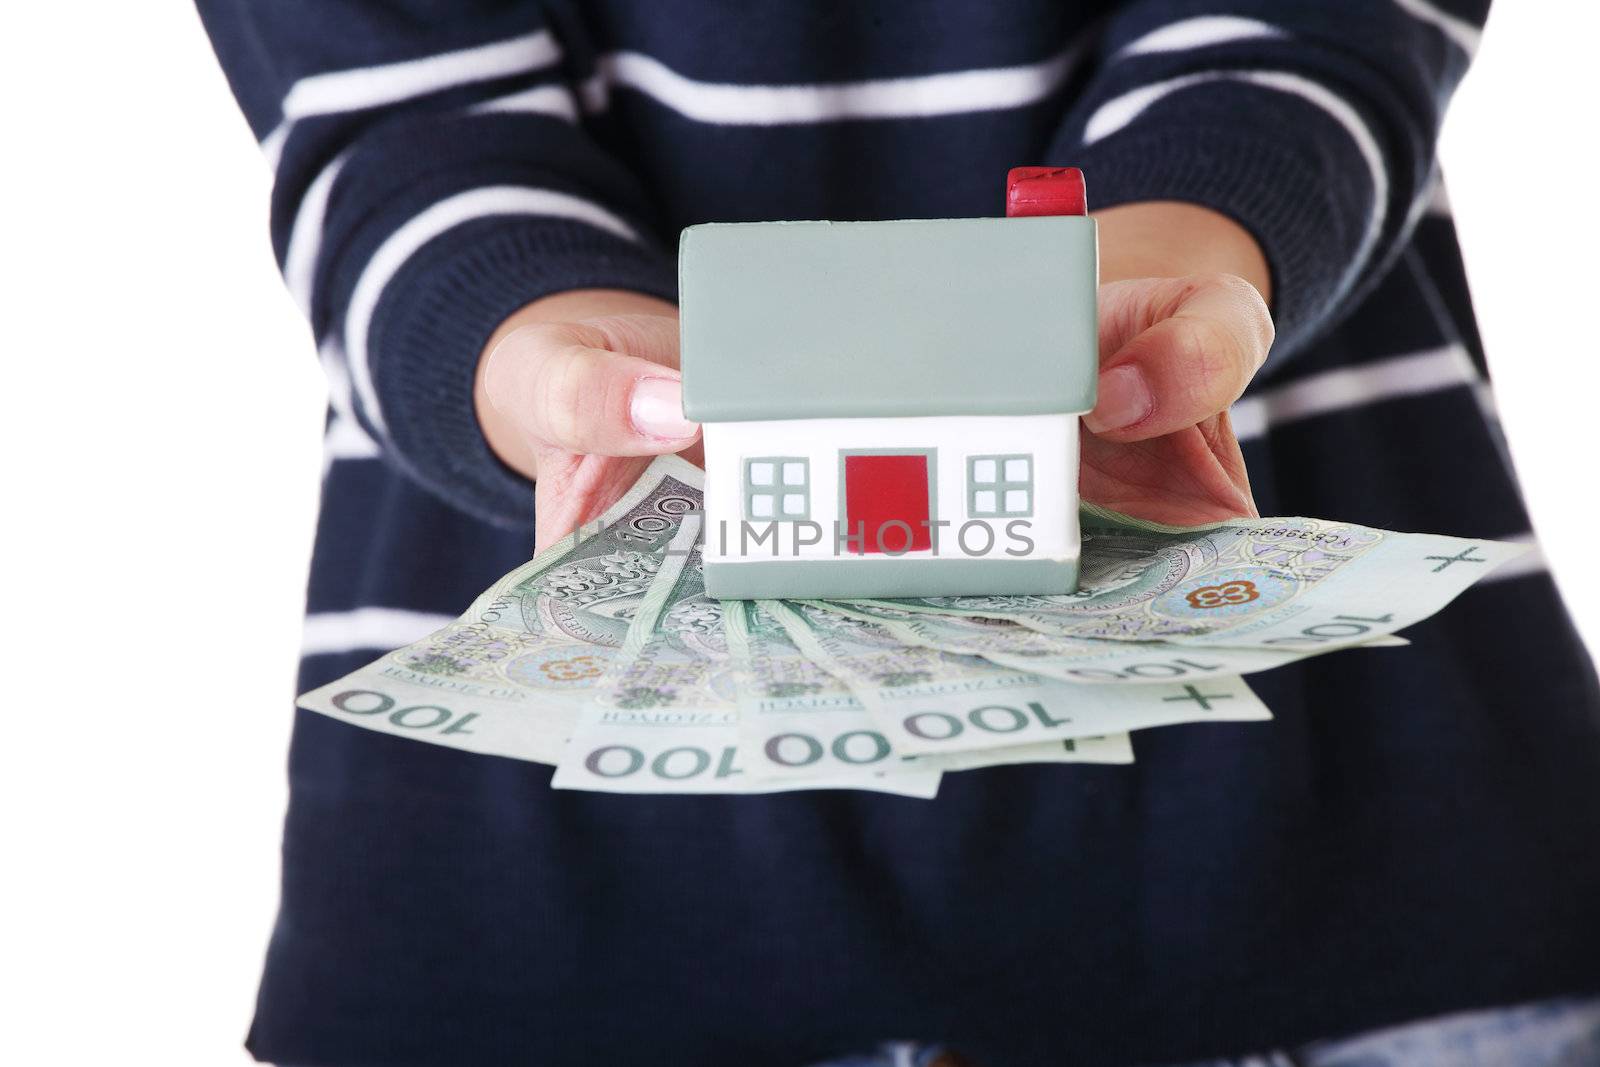 Woman holding PLN ( polish zloty ) bills and house model over white - real estate loan concept